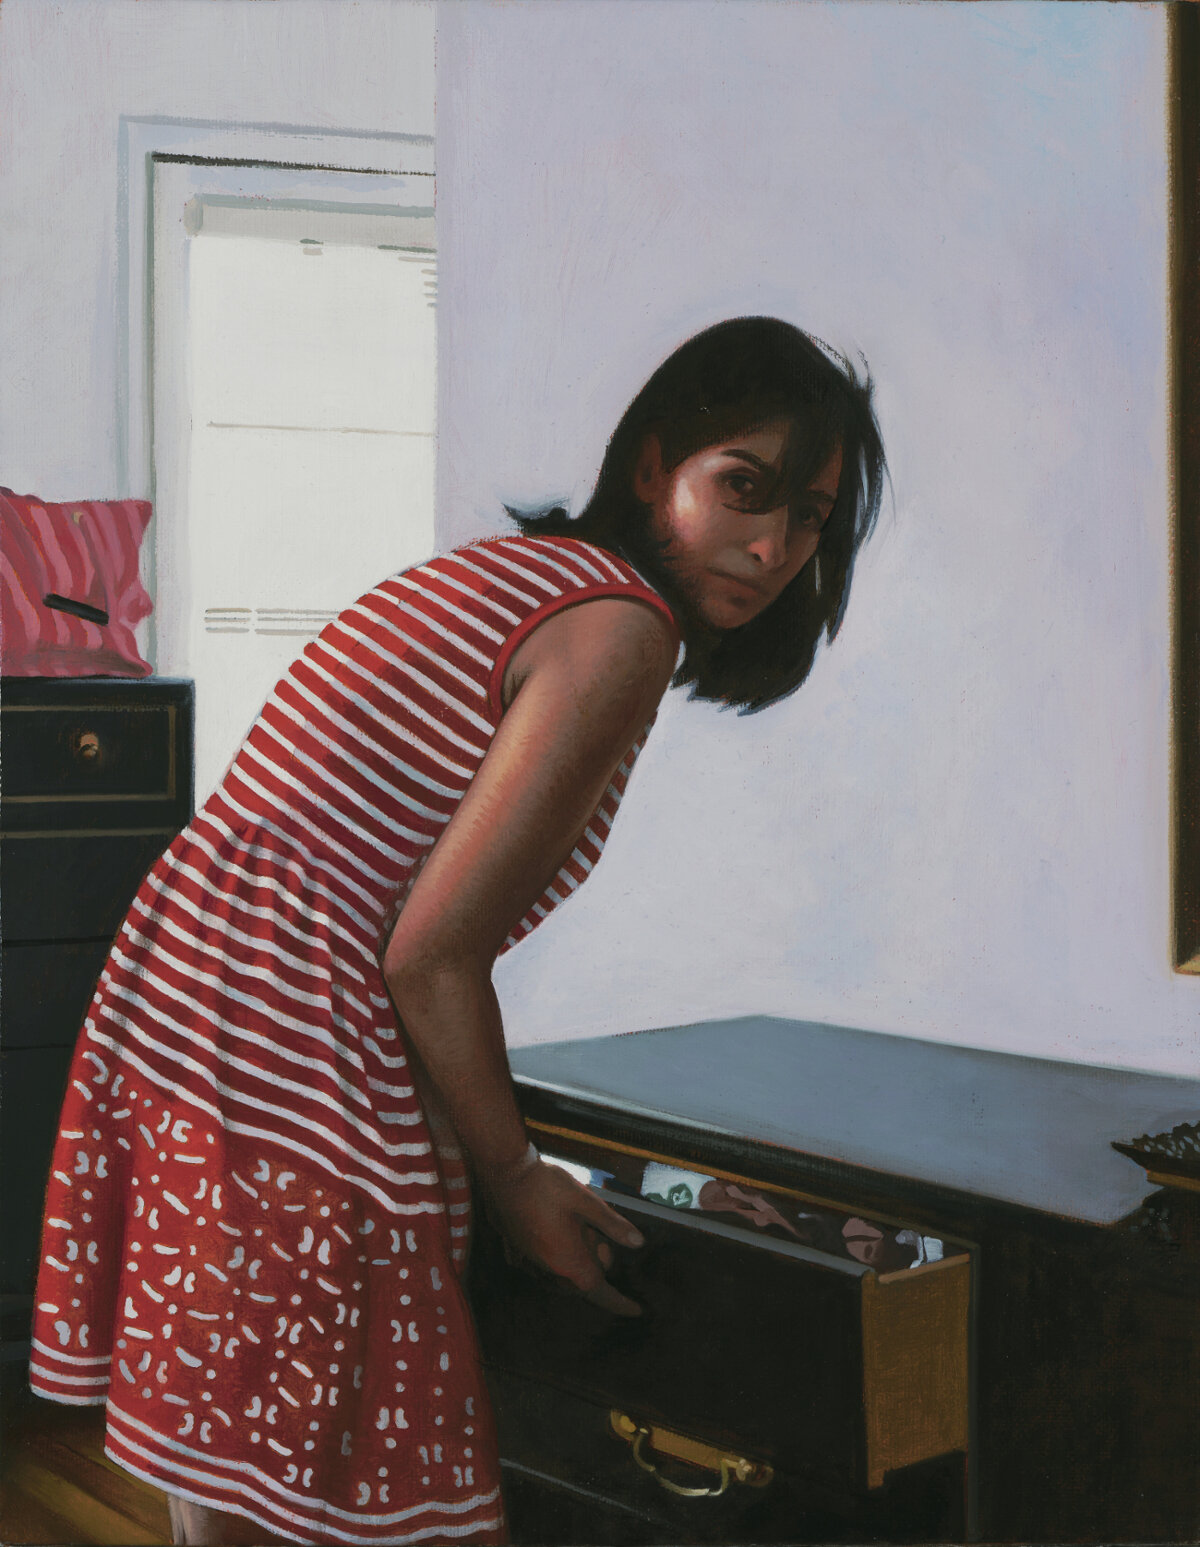   Susanna Hemmed , 2020, Oil on linen, 14 x 11 inches, Private collection 